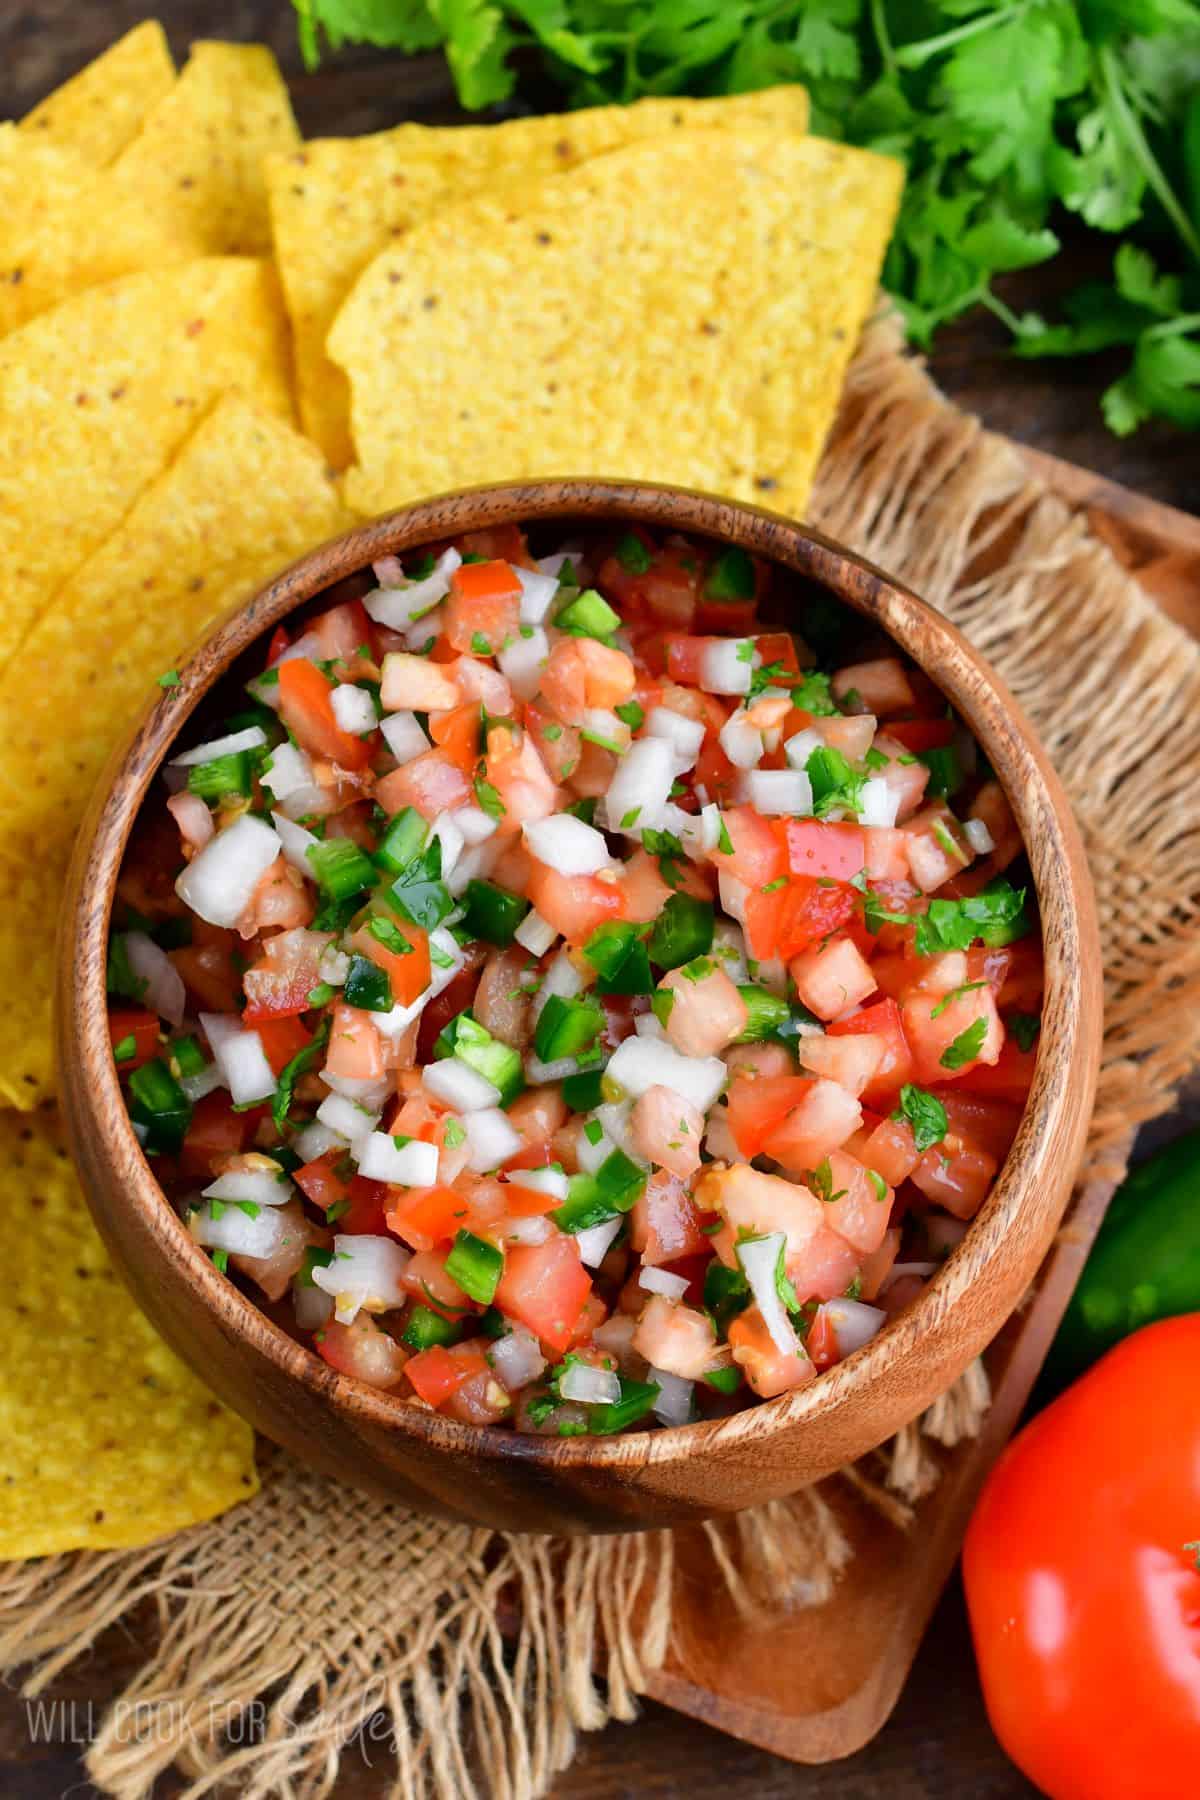 Pico de Gallo in a wood bowl with tortilla chips to the left side.